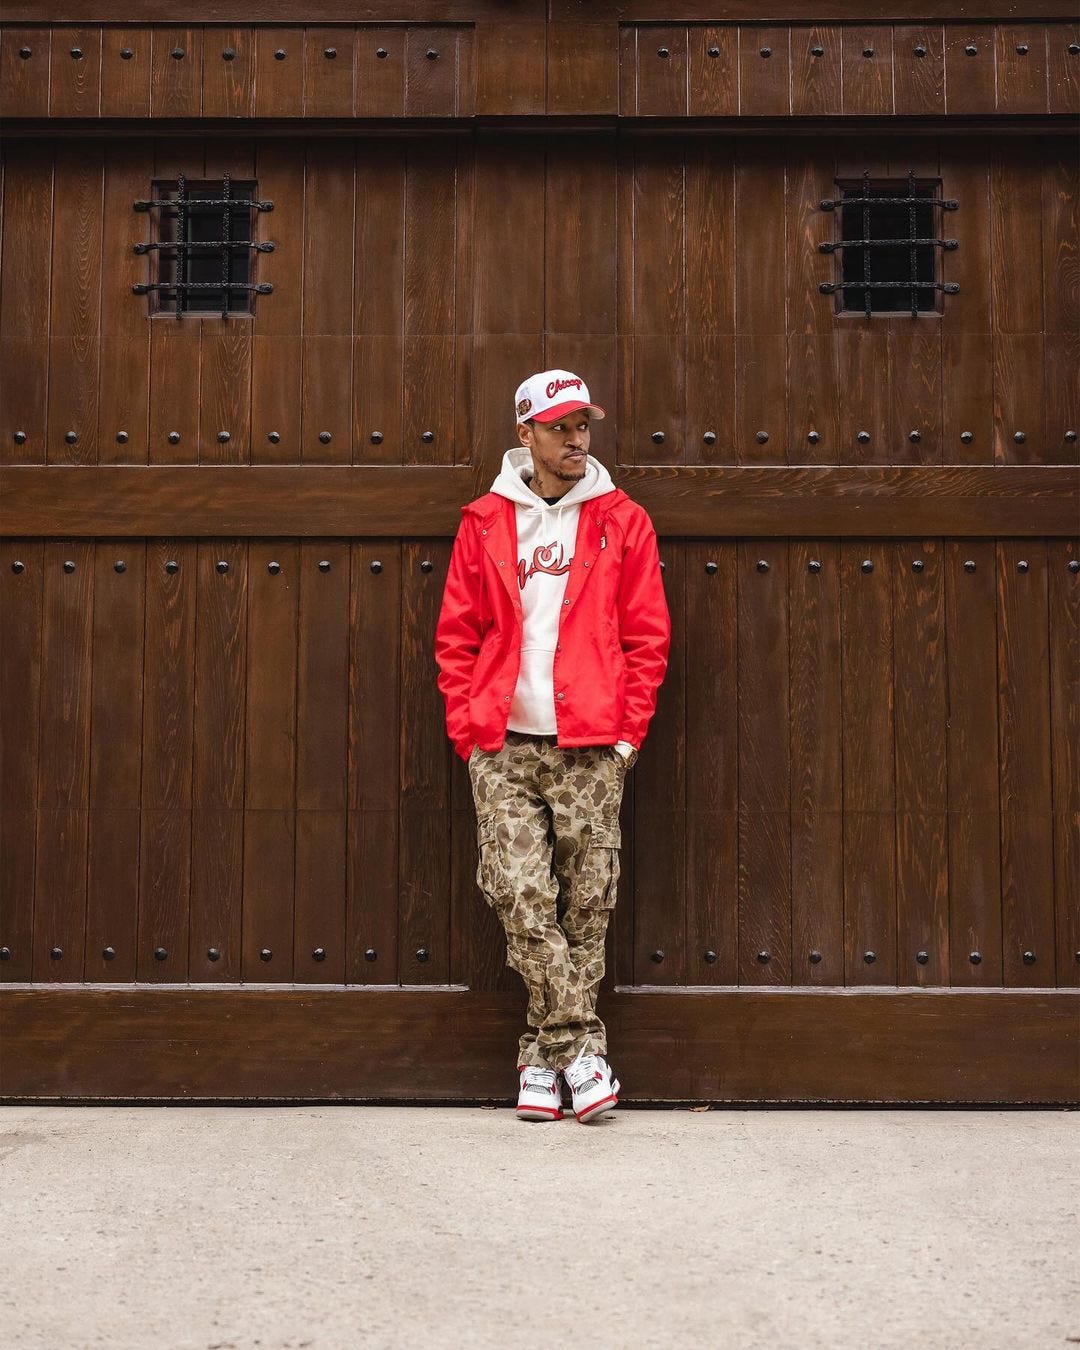 Men's camouflage pants suit with red coach jacket and sneakers